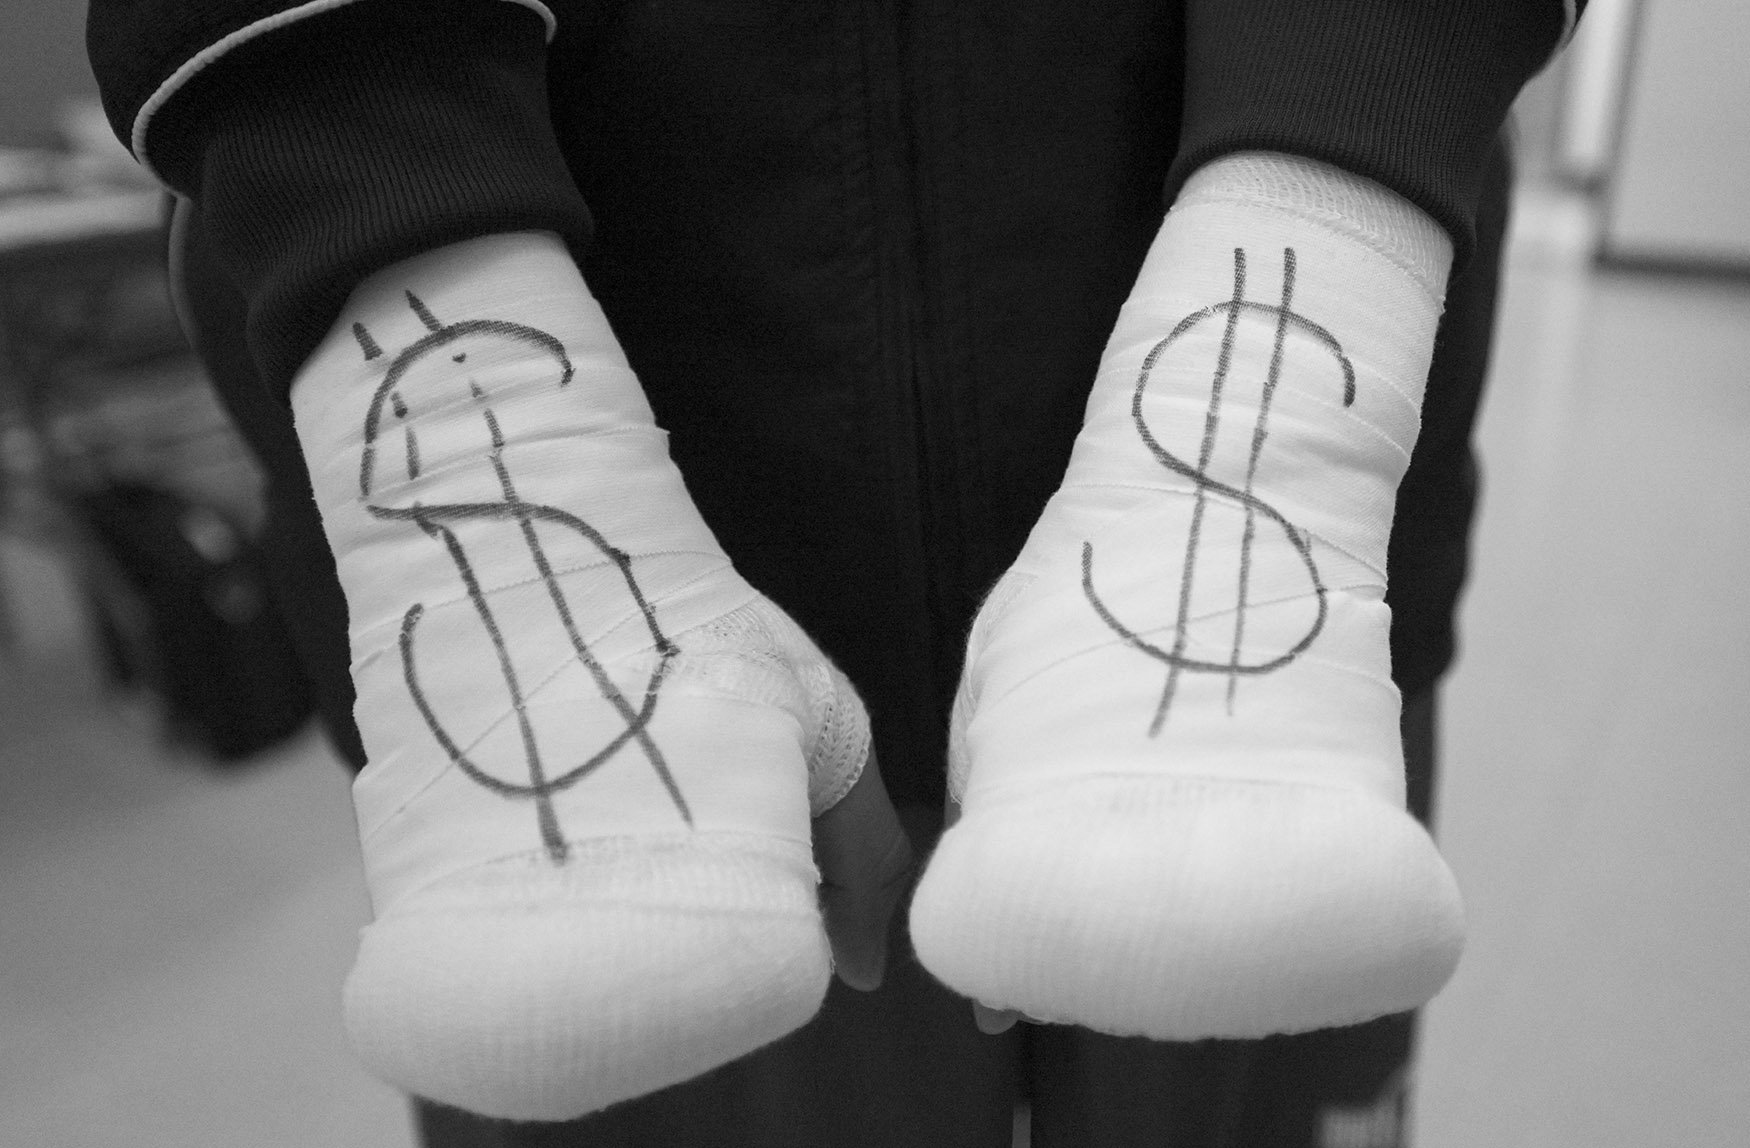  Boxer Roger Gomez-Peralta of the Villa Parke Boxing of Pasadena shows off his Money sings on his taped hands prior to his bout during the Golden Gloves competition at Loma Alta Park in Altadena on Thursday, February 23, 2023.  